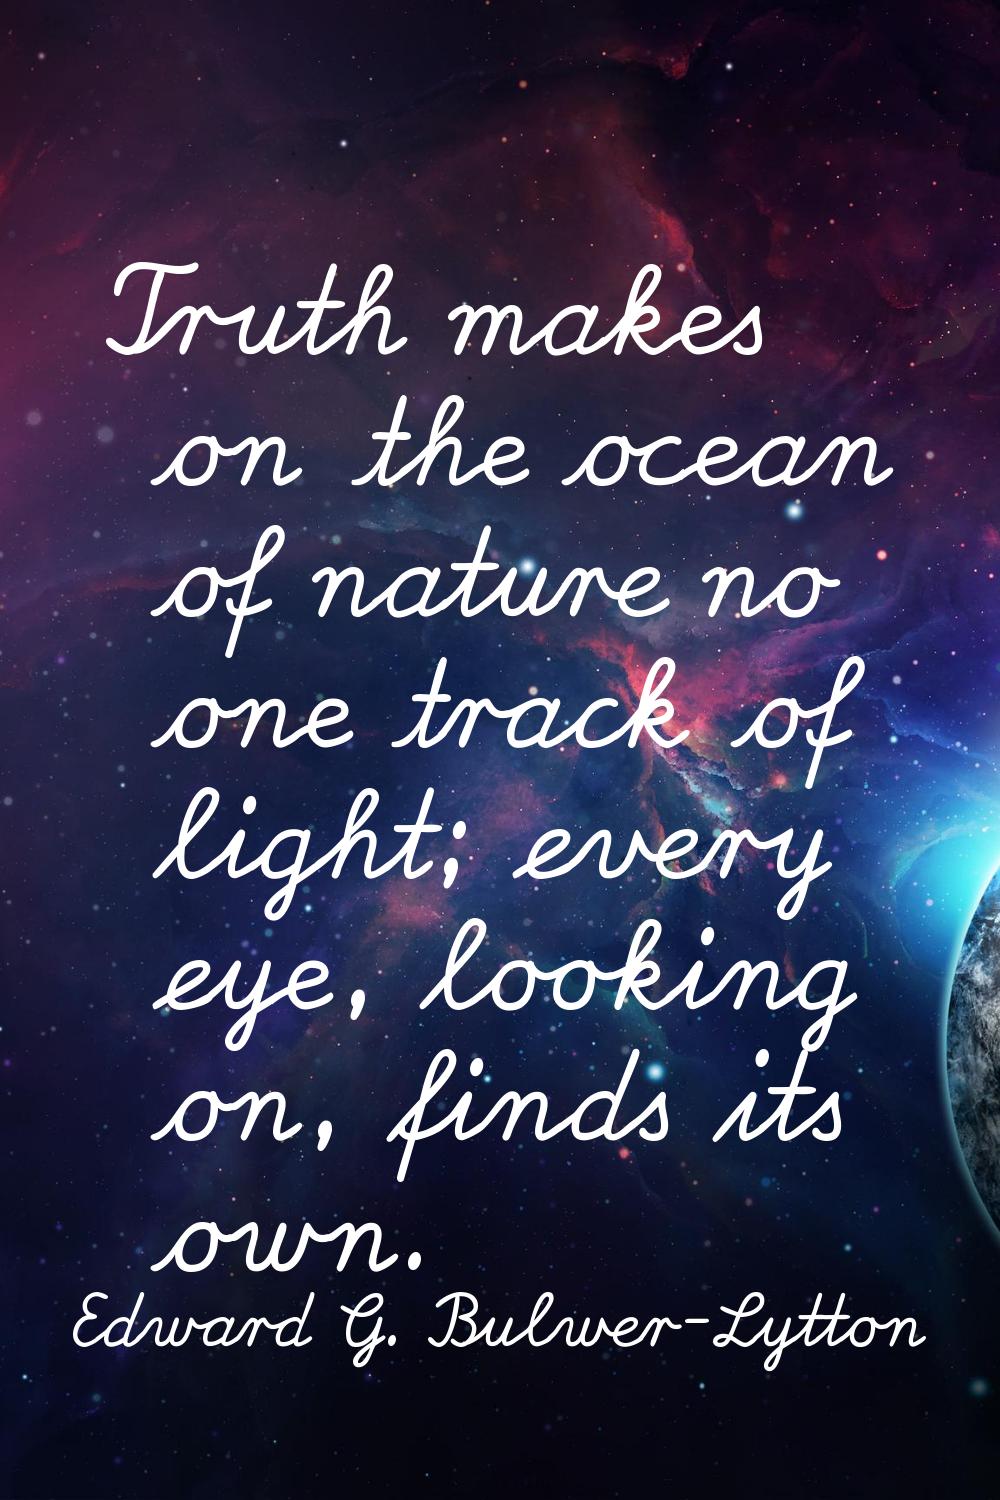 Truth makes on the ocean of nature no one track of light; every eye, looking on, finds its own.